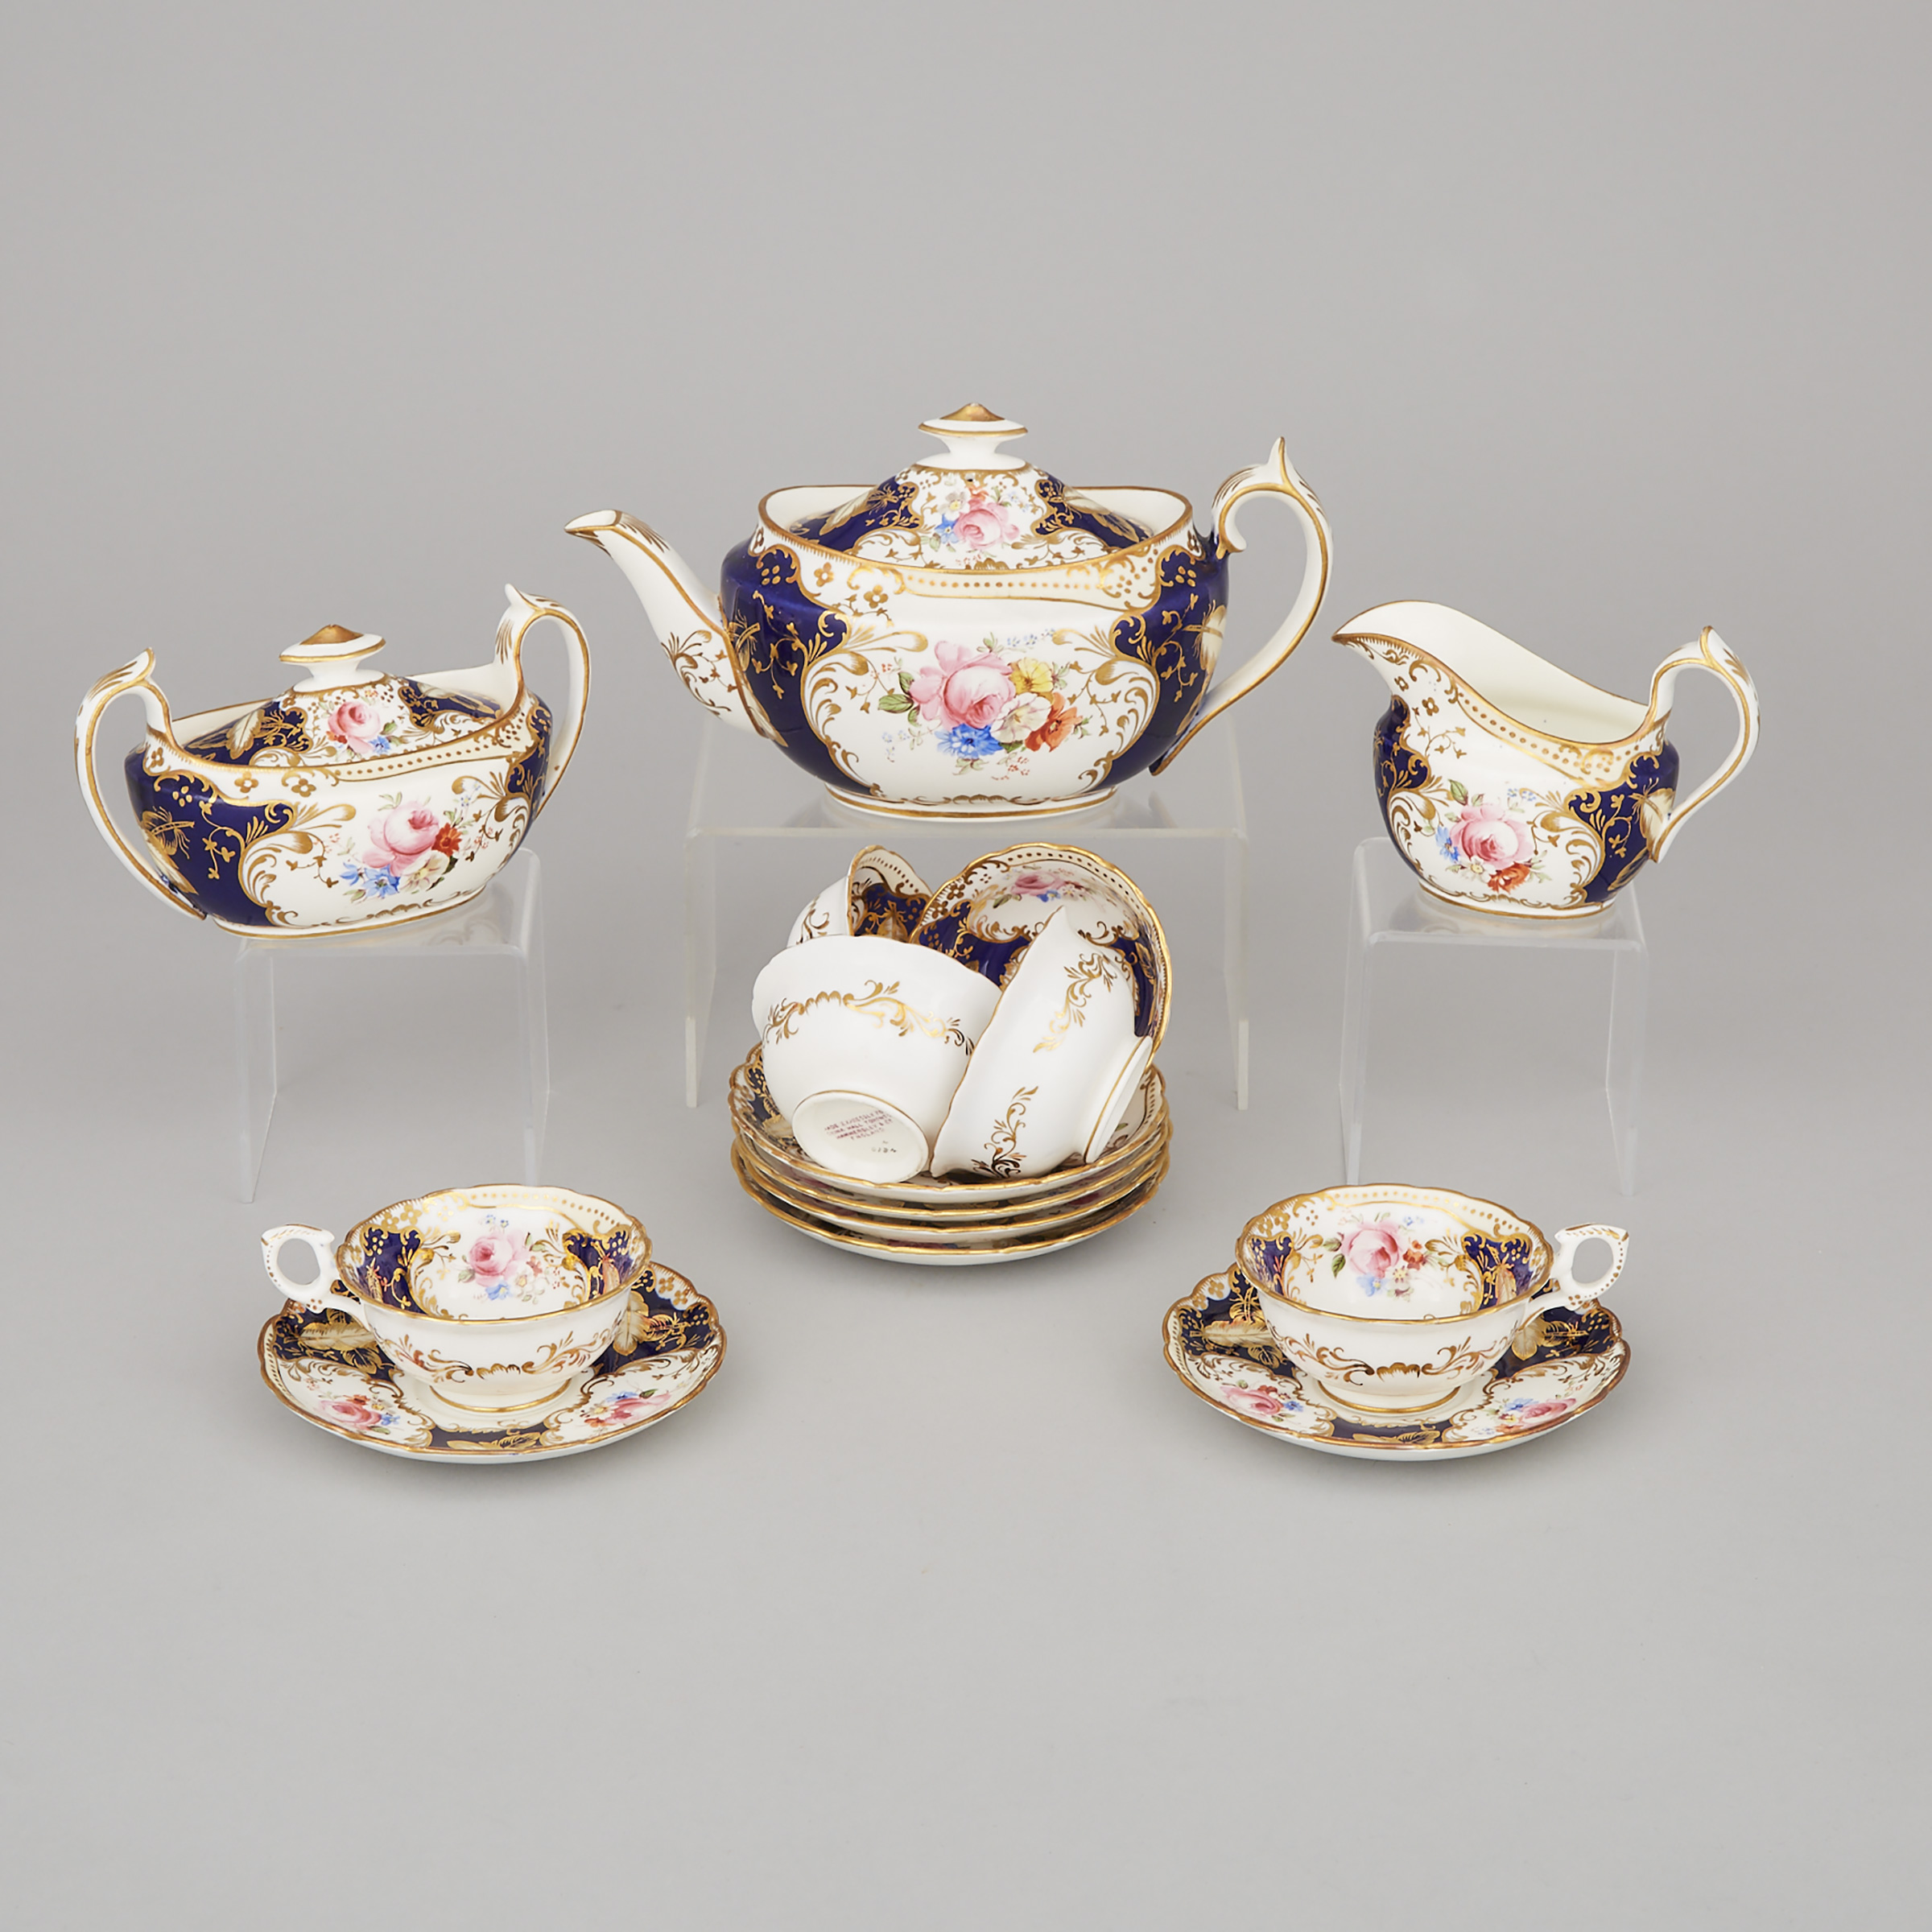 Hammersley Floral Decorated Blue Ground Tea Service, for China Hall, Toronto, 20th century